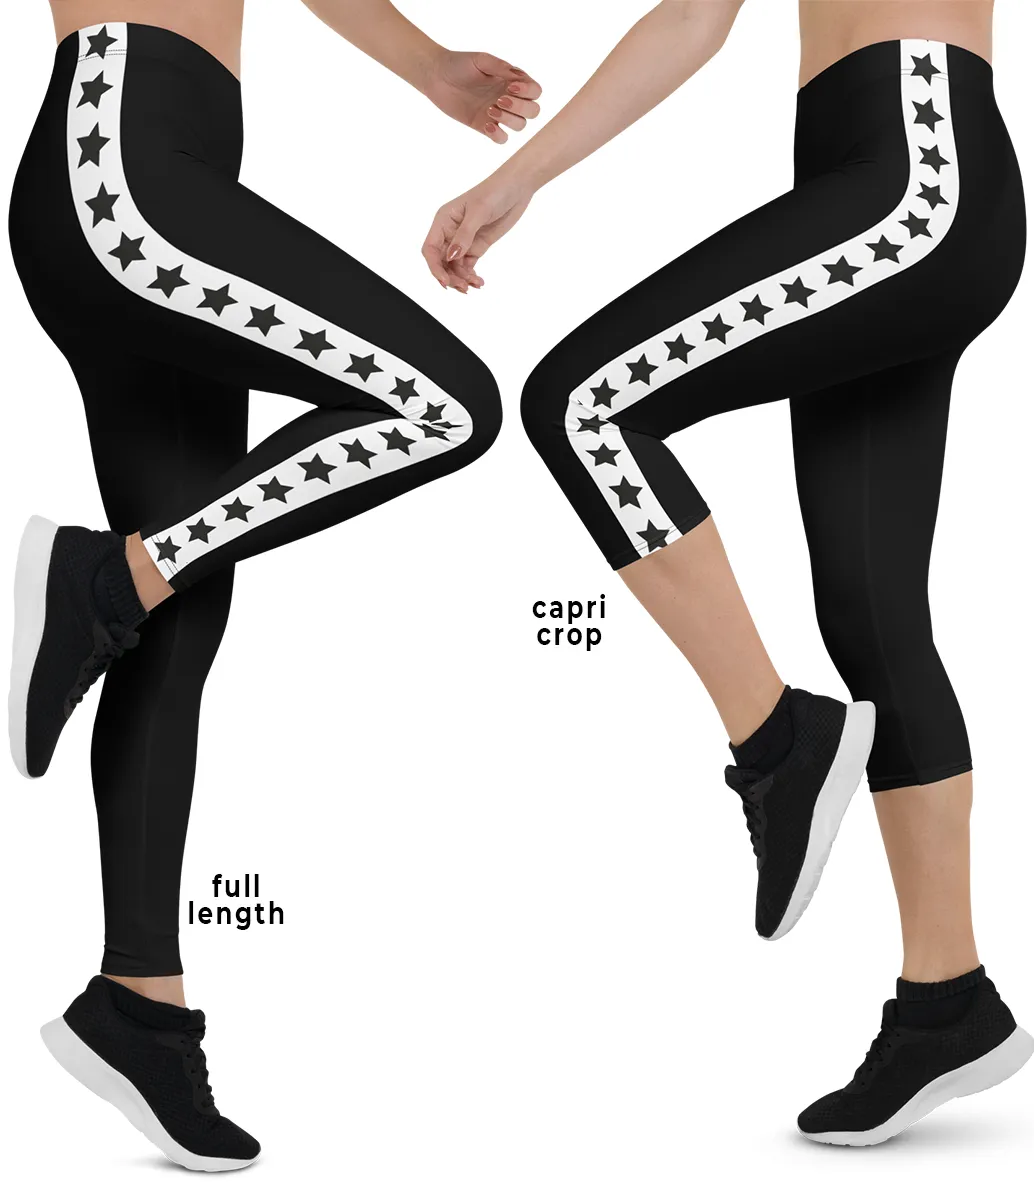 Side Stripe Star Leggings - Designed By Squeaky Chimp T-shirts